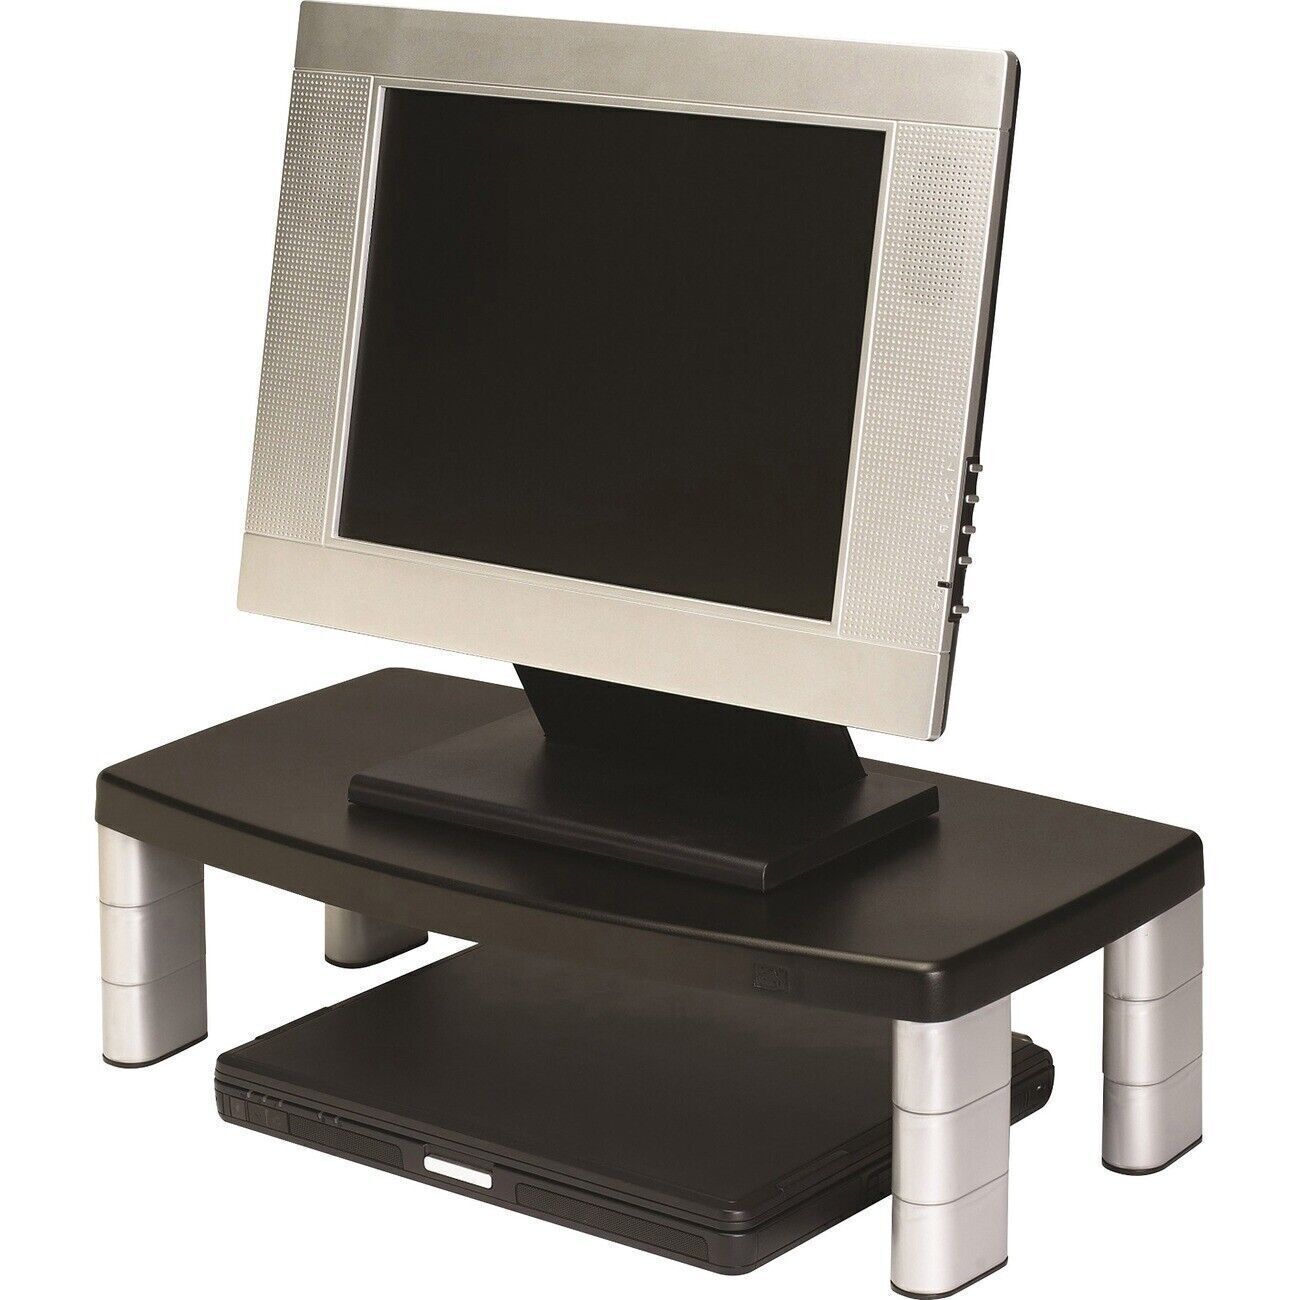 3M MS90B Adjustable Monitor Riser Stand - Up to 17" Screen Support - 40 lb Load